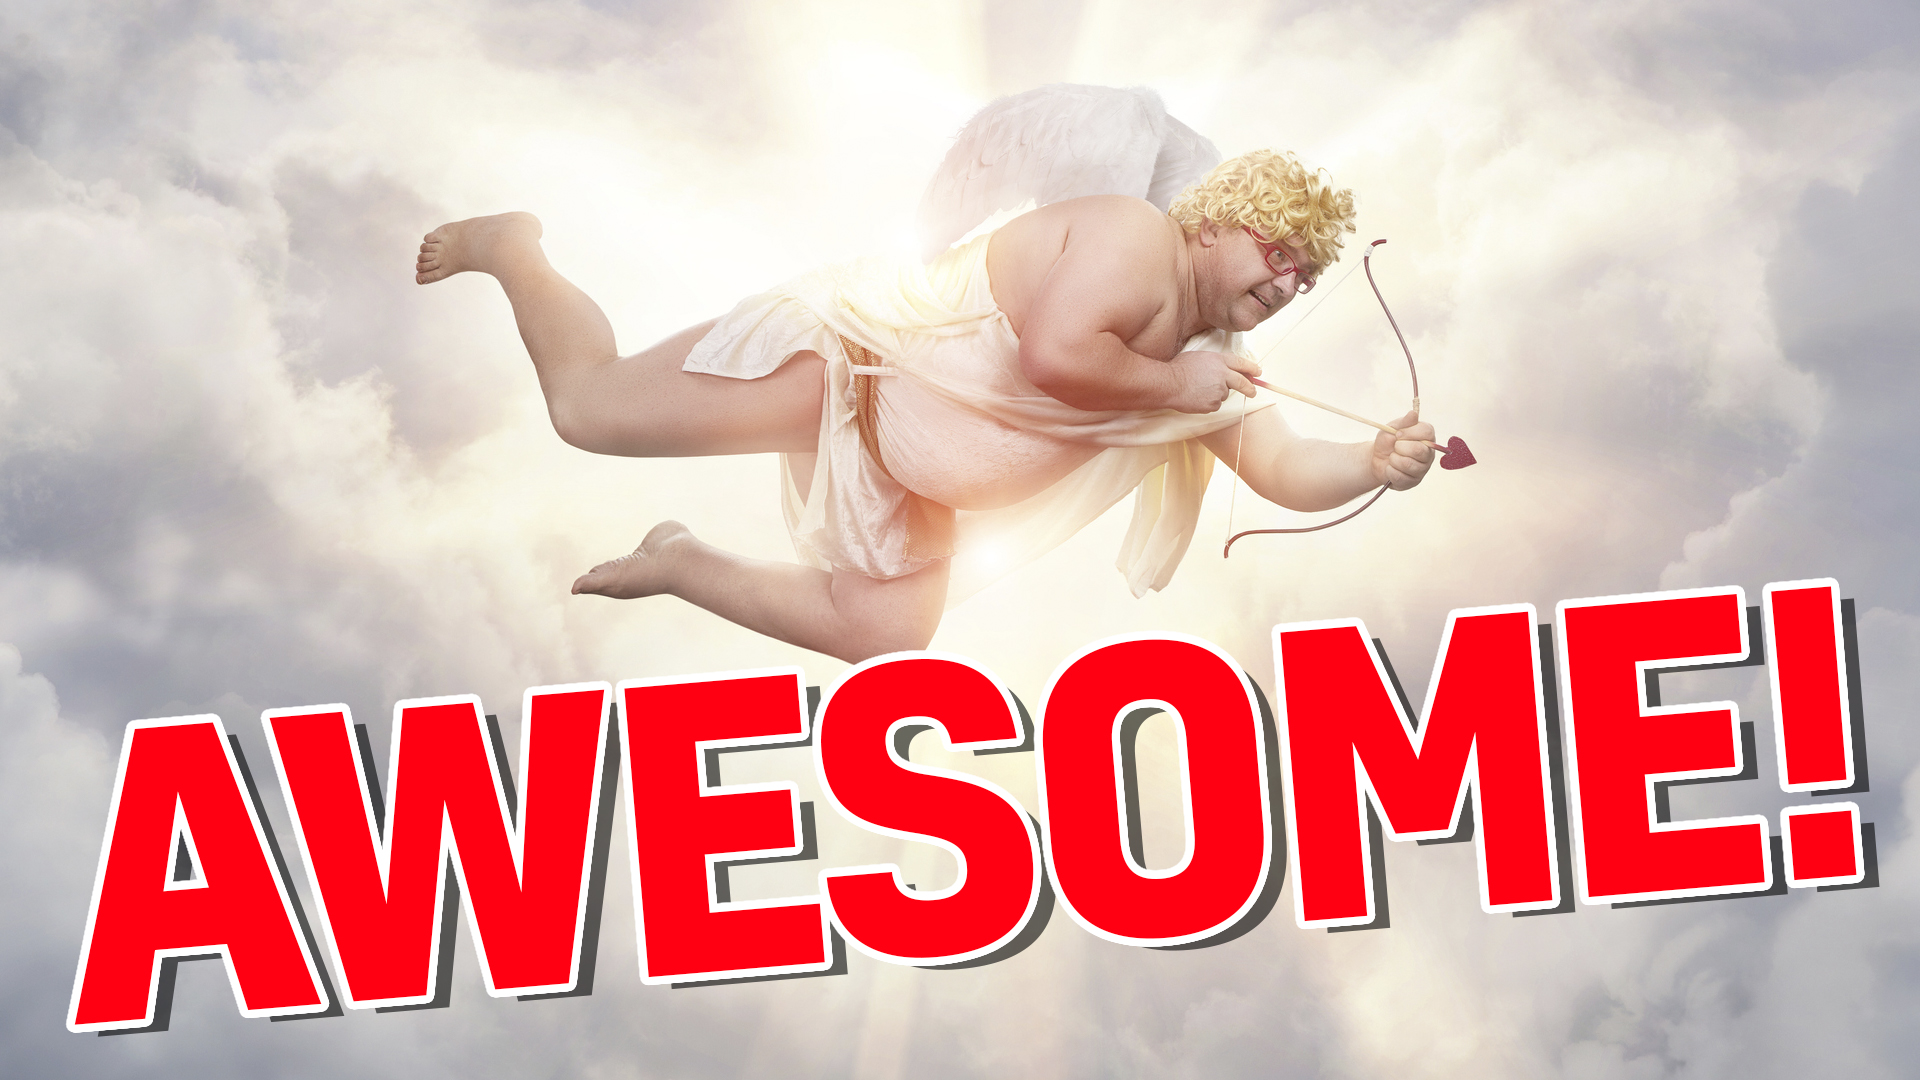 Cupid says your score is awesome!